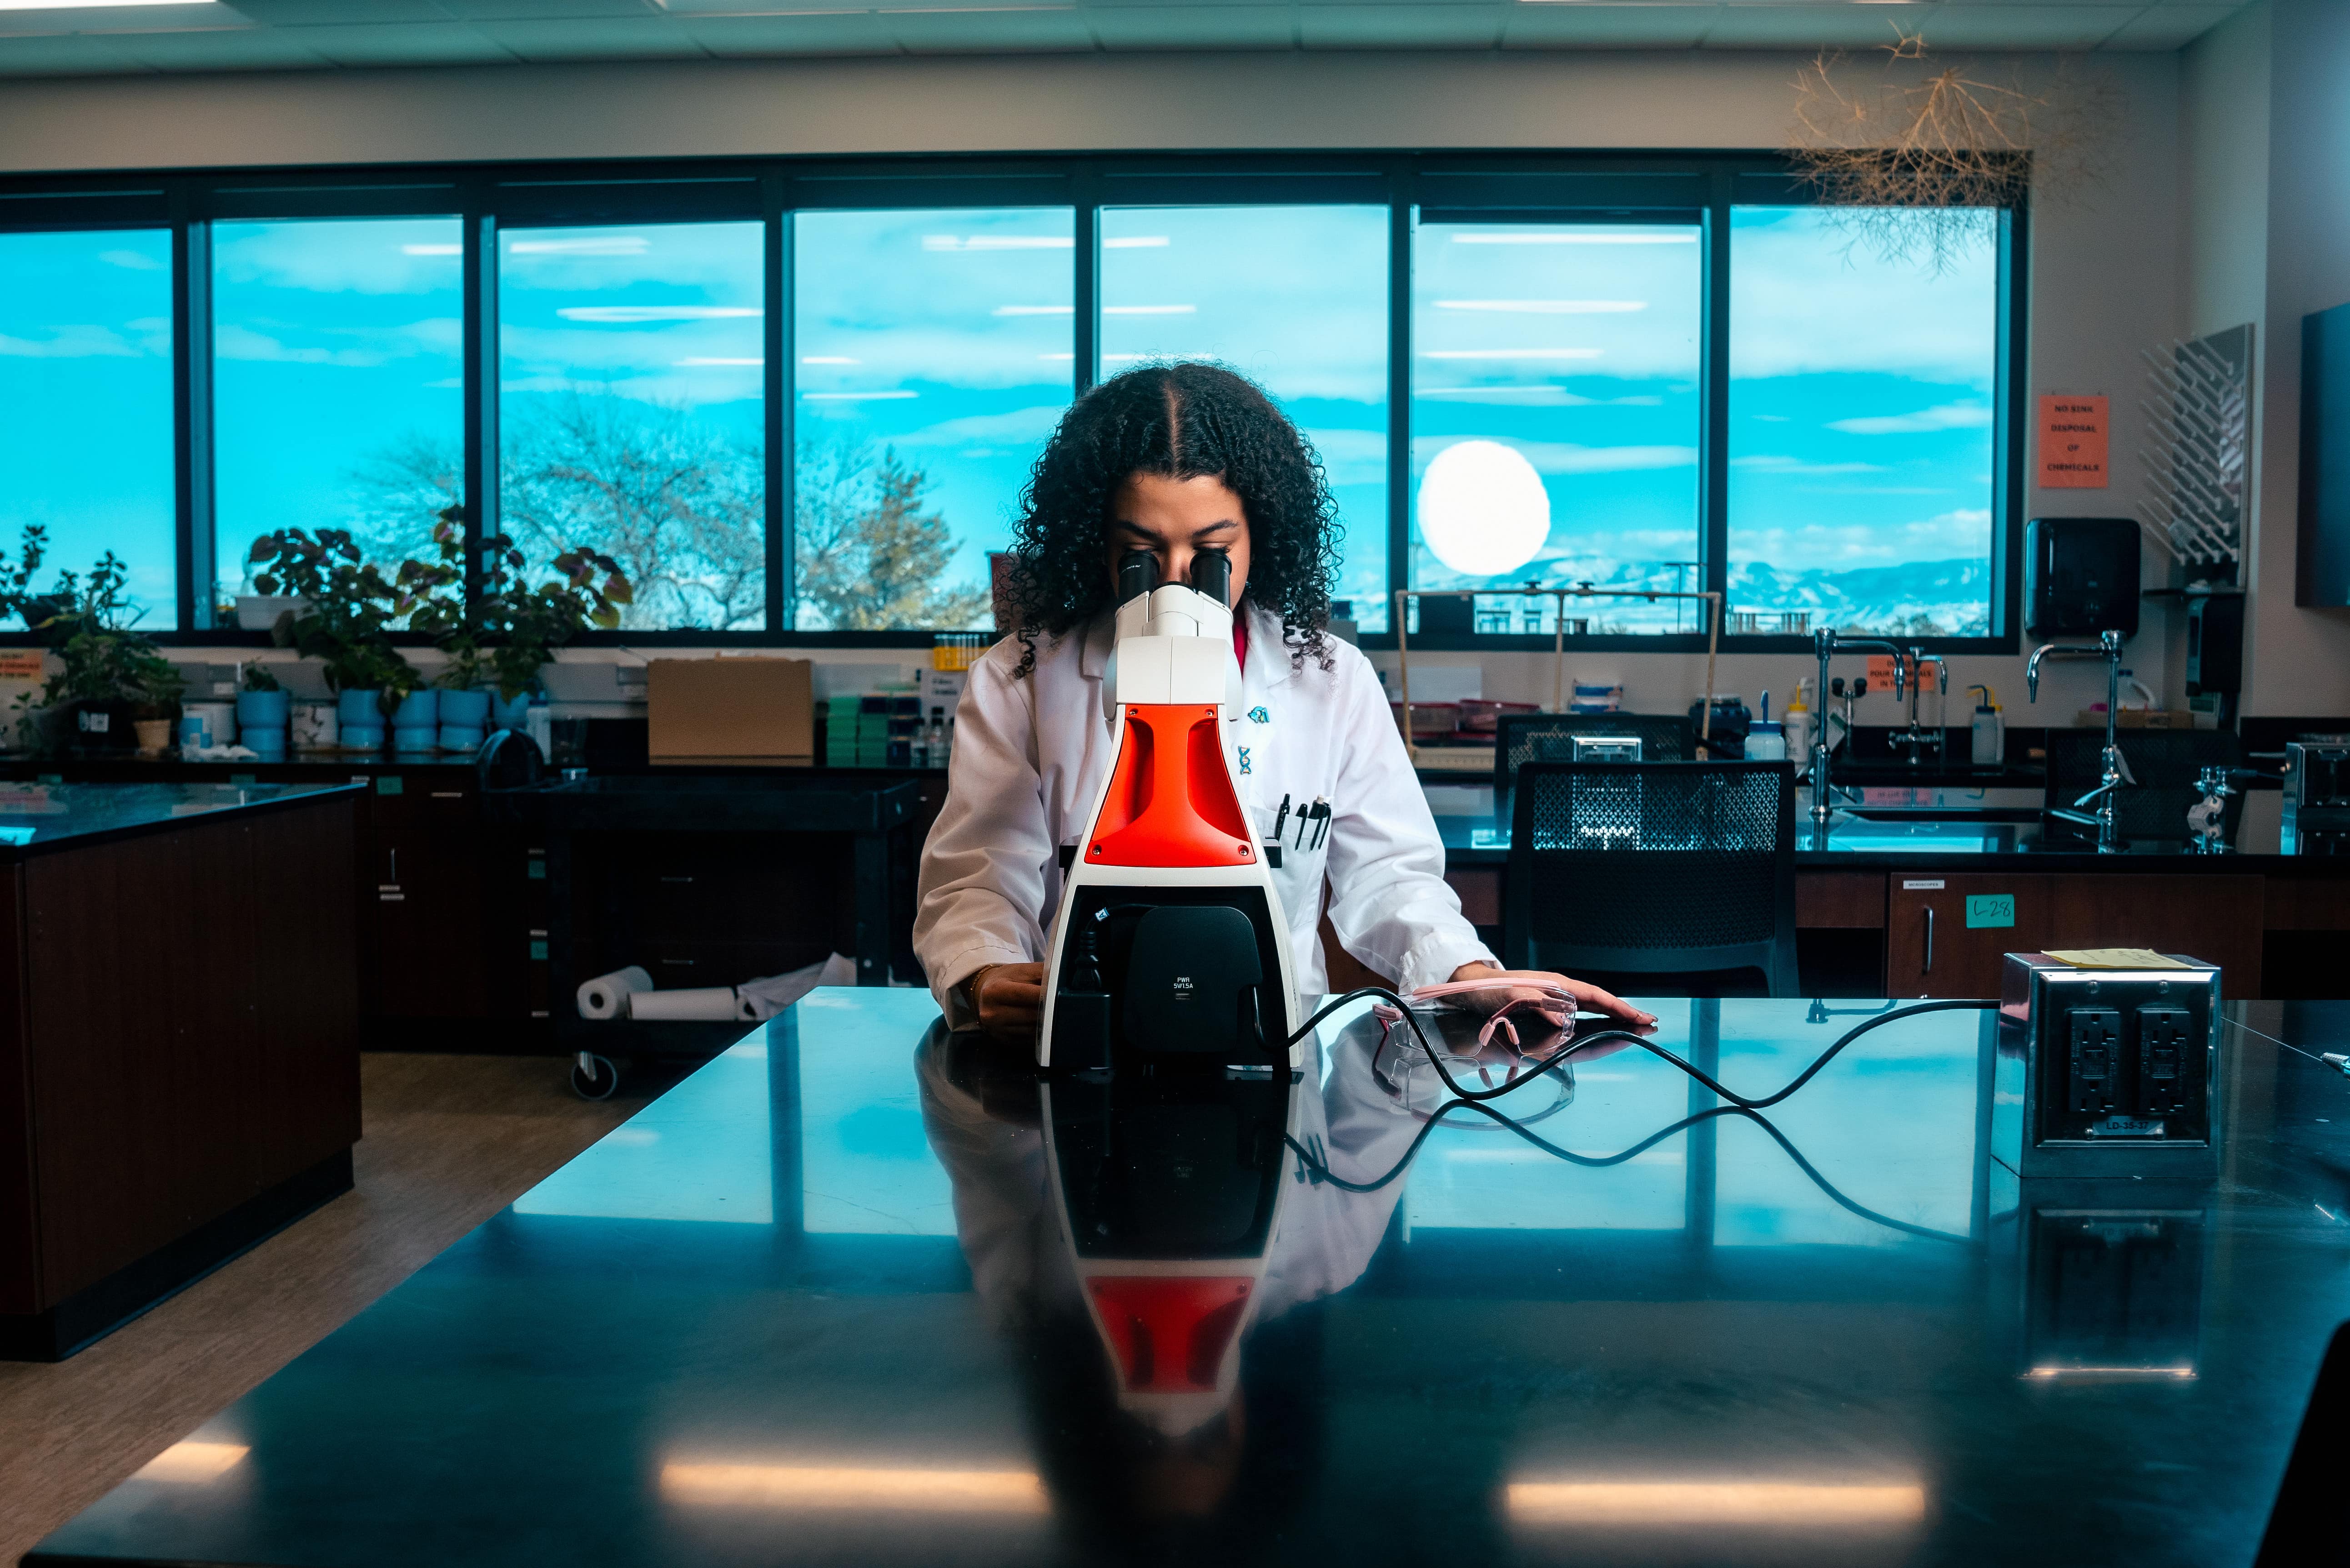 A student with dark skin tone wears a lab coat and looks into a microscope. Mountains can be seen through the wall of windows in the background.